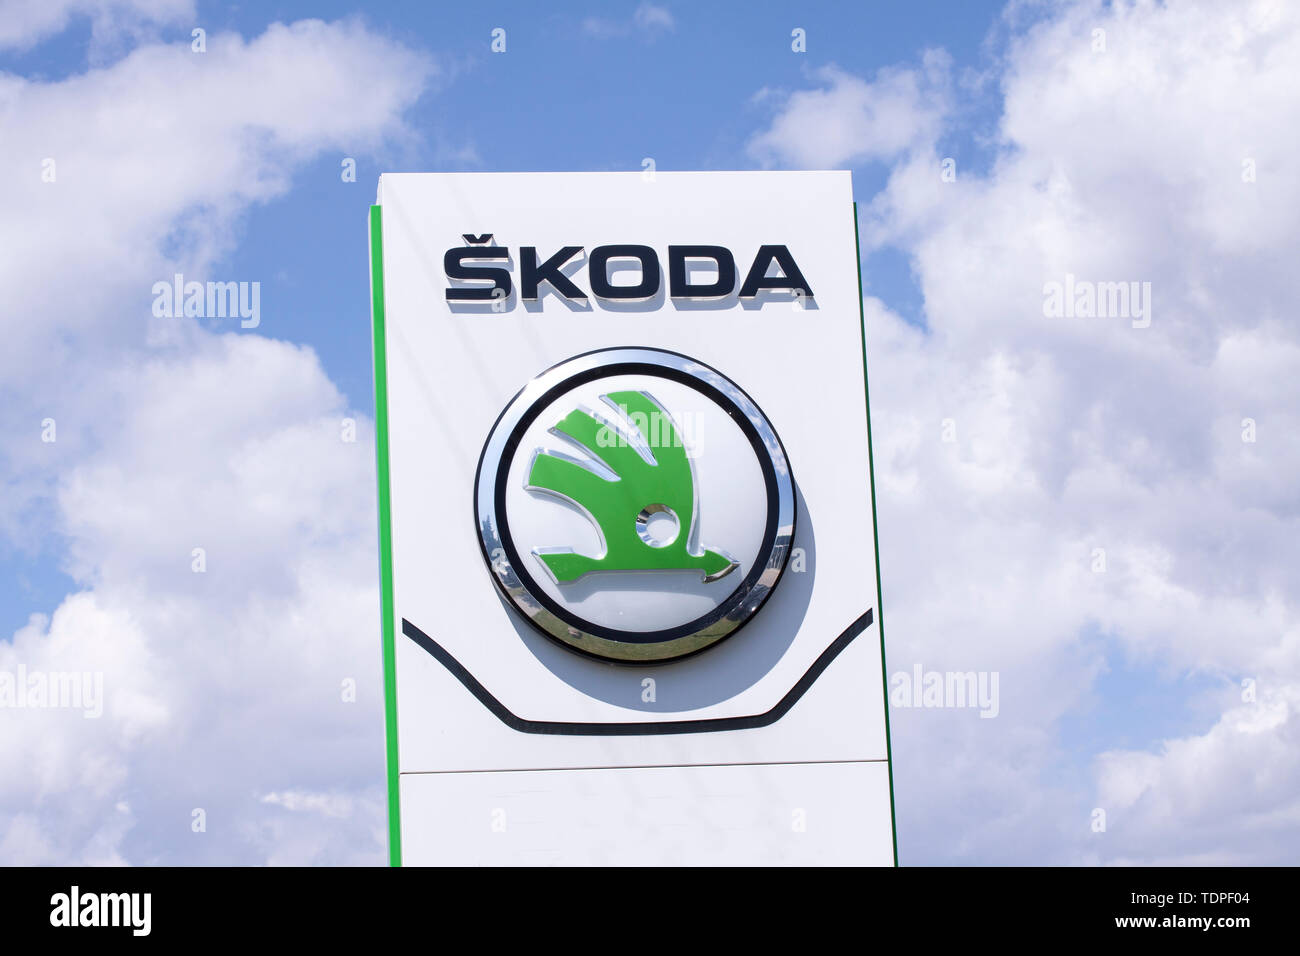 Sign with the logo of Škoda. Czech automobile manufacturer. In 2000 Škoda became a wholly owned subsidiary of the Volkswagen Group. Copenhagen, Denmar Stock Photo